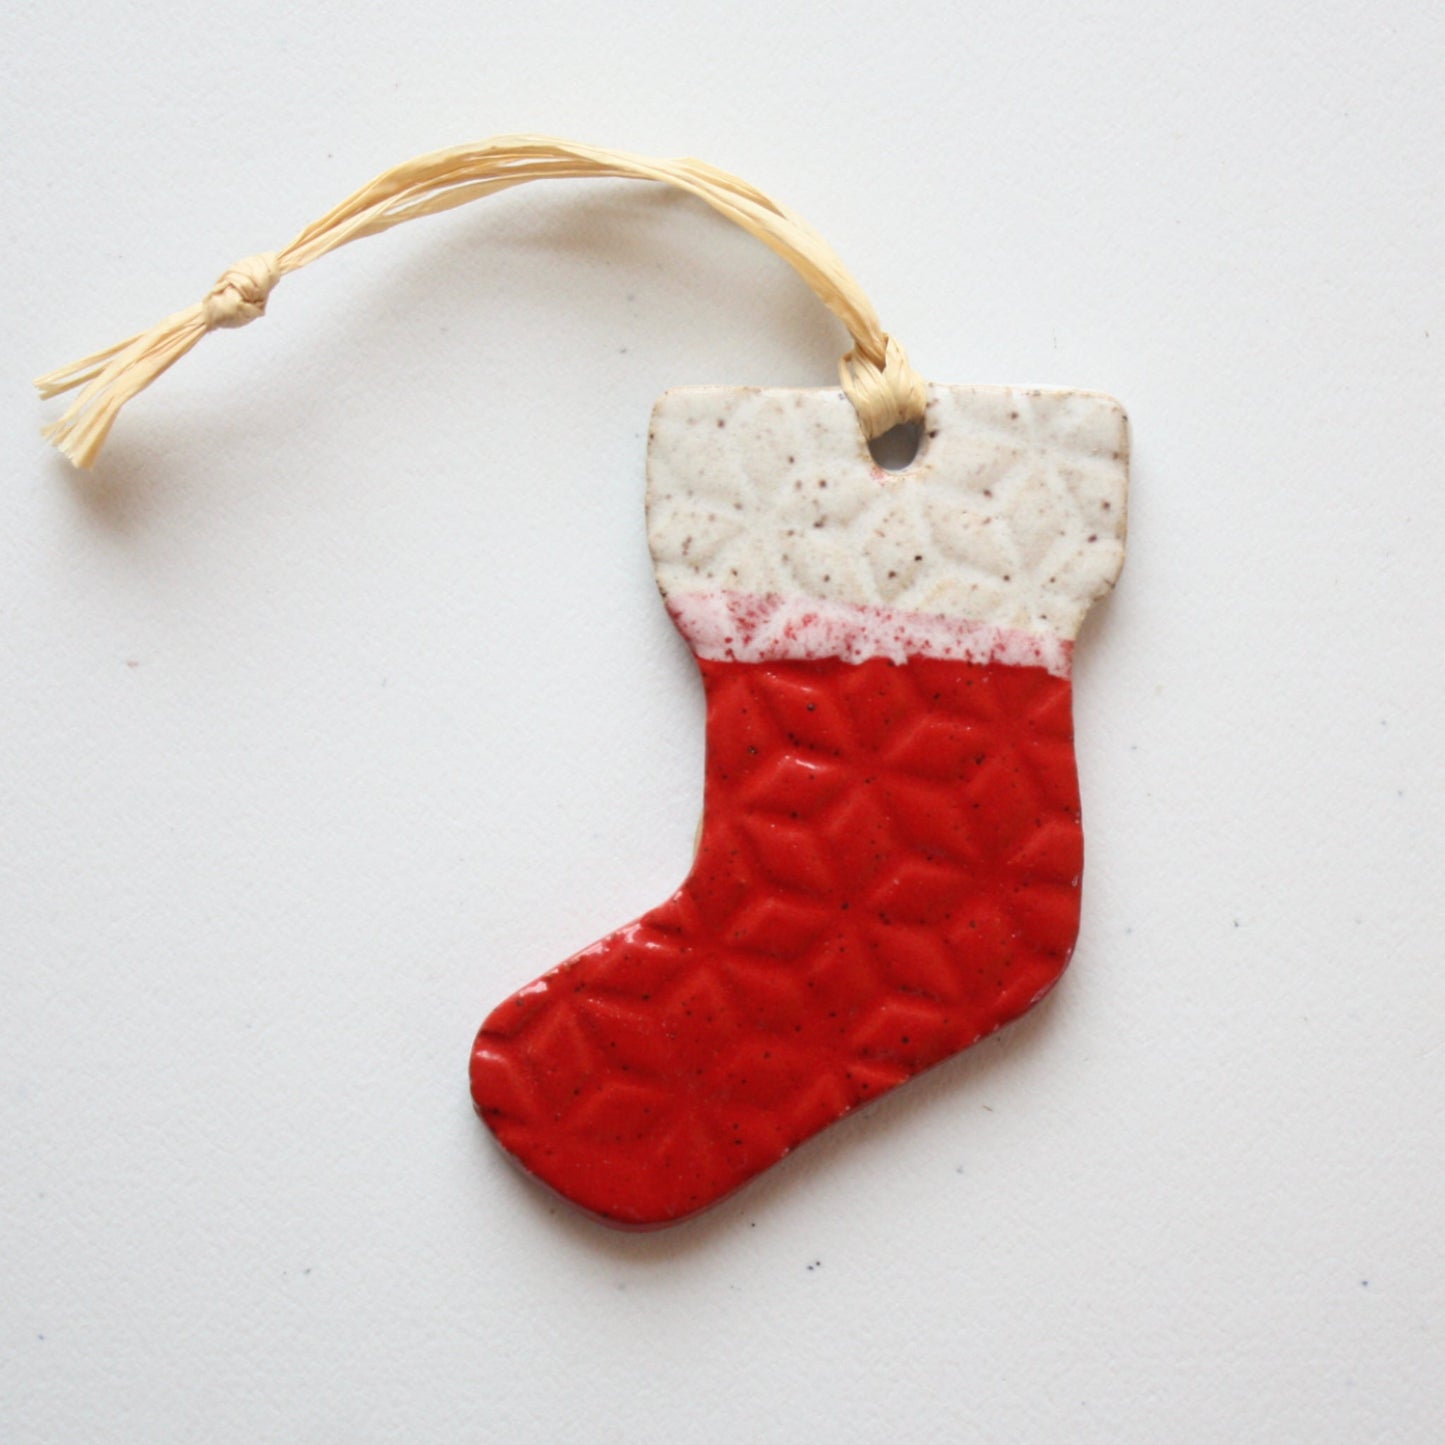 Handmade Ceramic Stocking Ornaments - Made in the USA